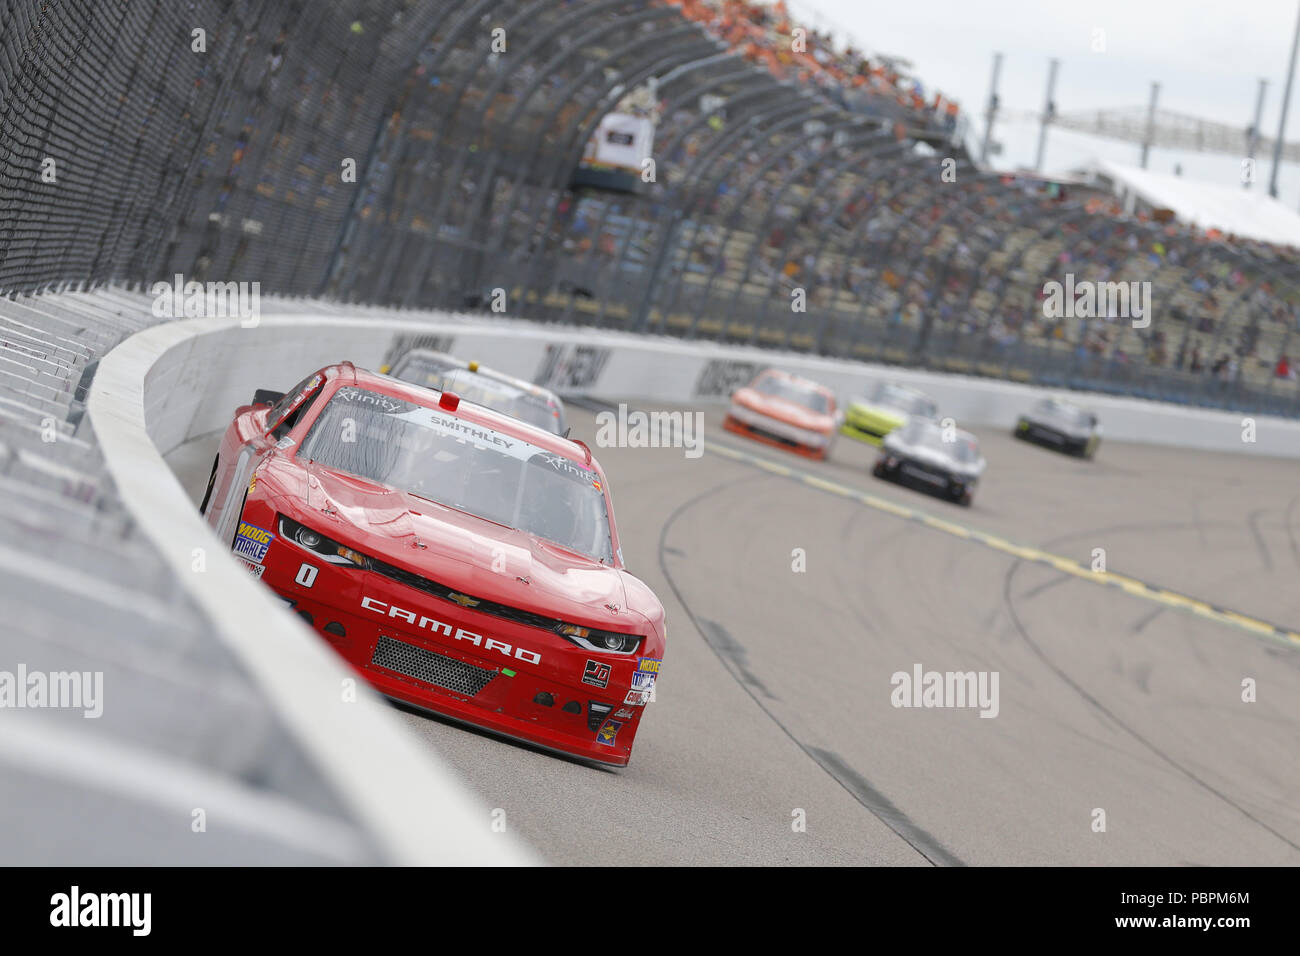 Newton, Iowa, USA. 28th July, 2018. Garrett Smithley (0) brings his race car down the front stretch during the US Cellular 250 at Iowa Speedway in Newton, Iowa. Credit: Chris Owens Asp Inc/ASP/ZUMA Wire/Alamy Live News Stock Photo